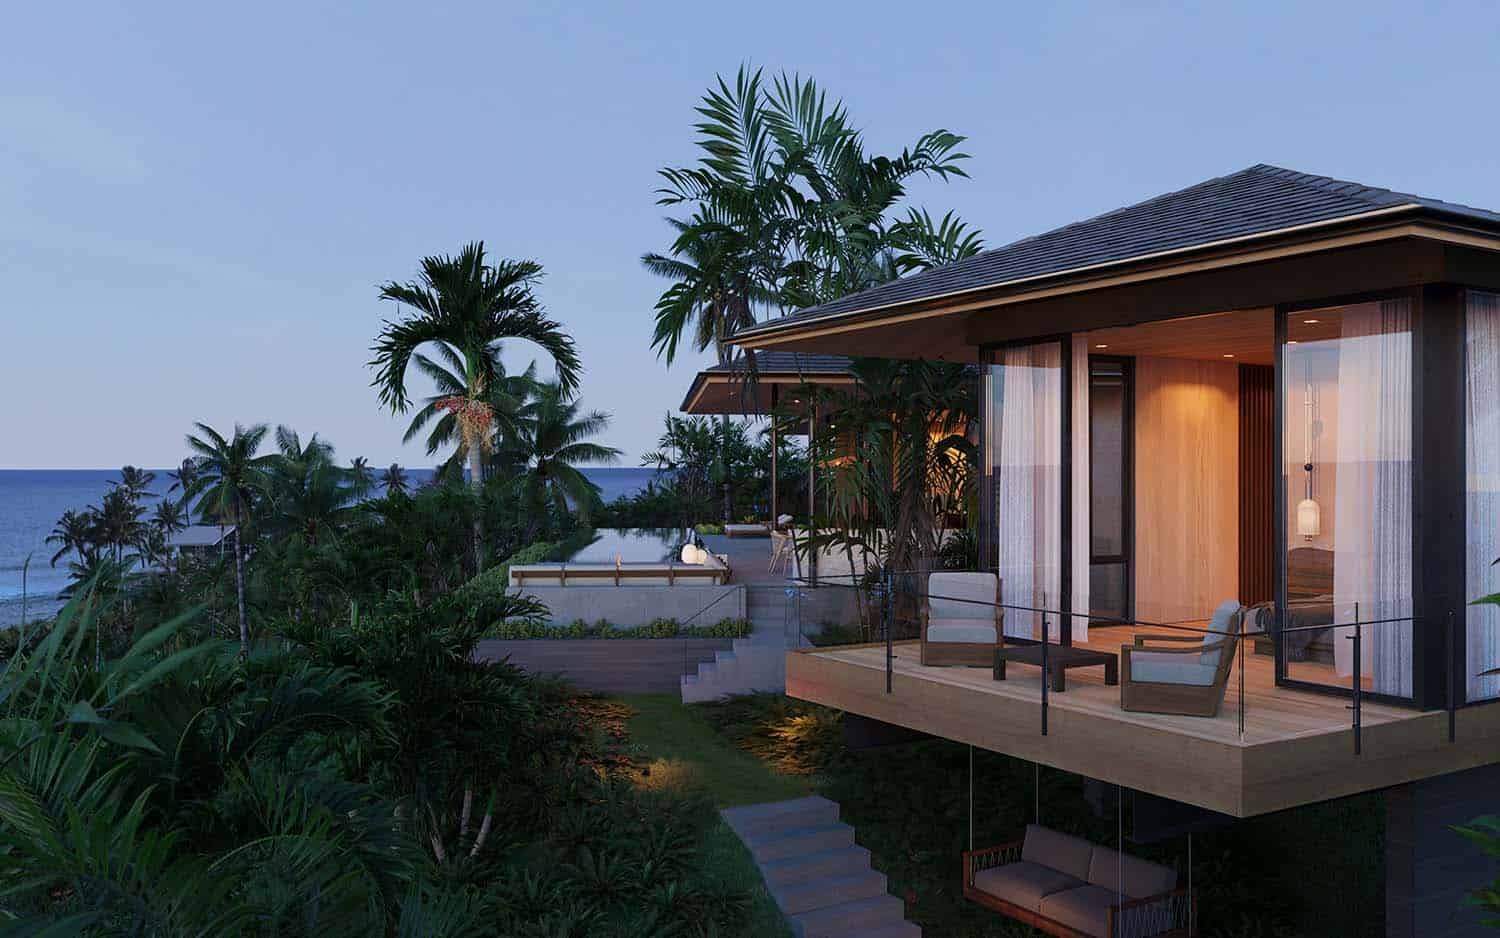 modern tropical house exterior bedroom view with limestone floors at dusk